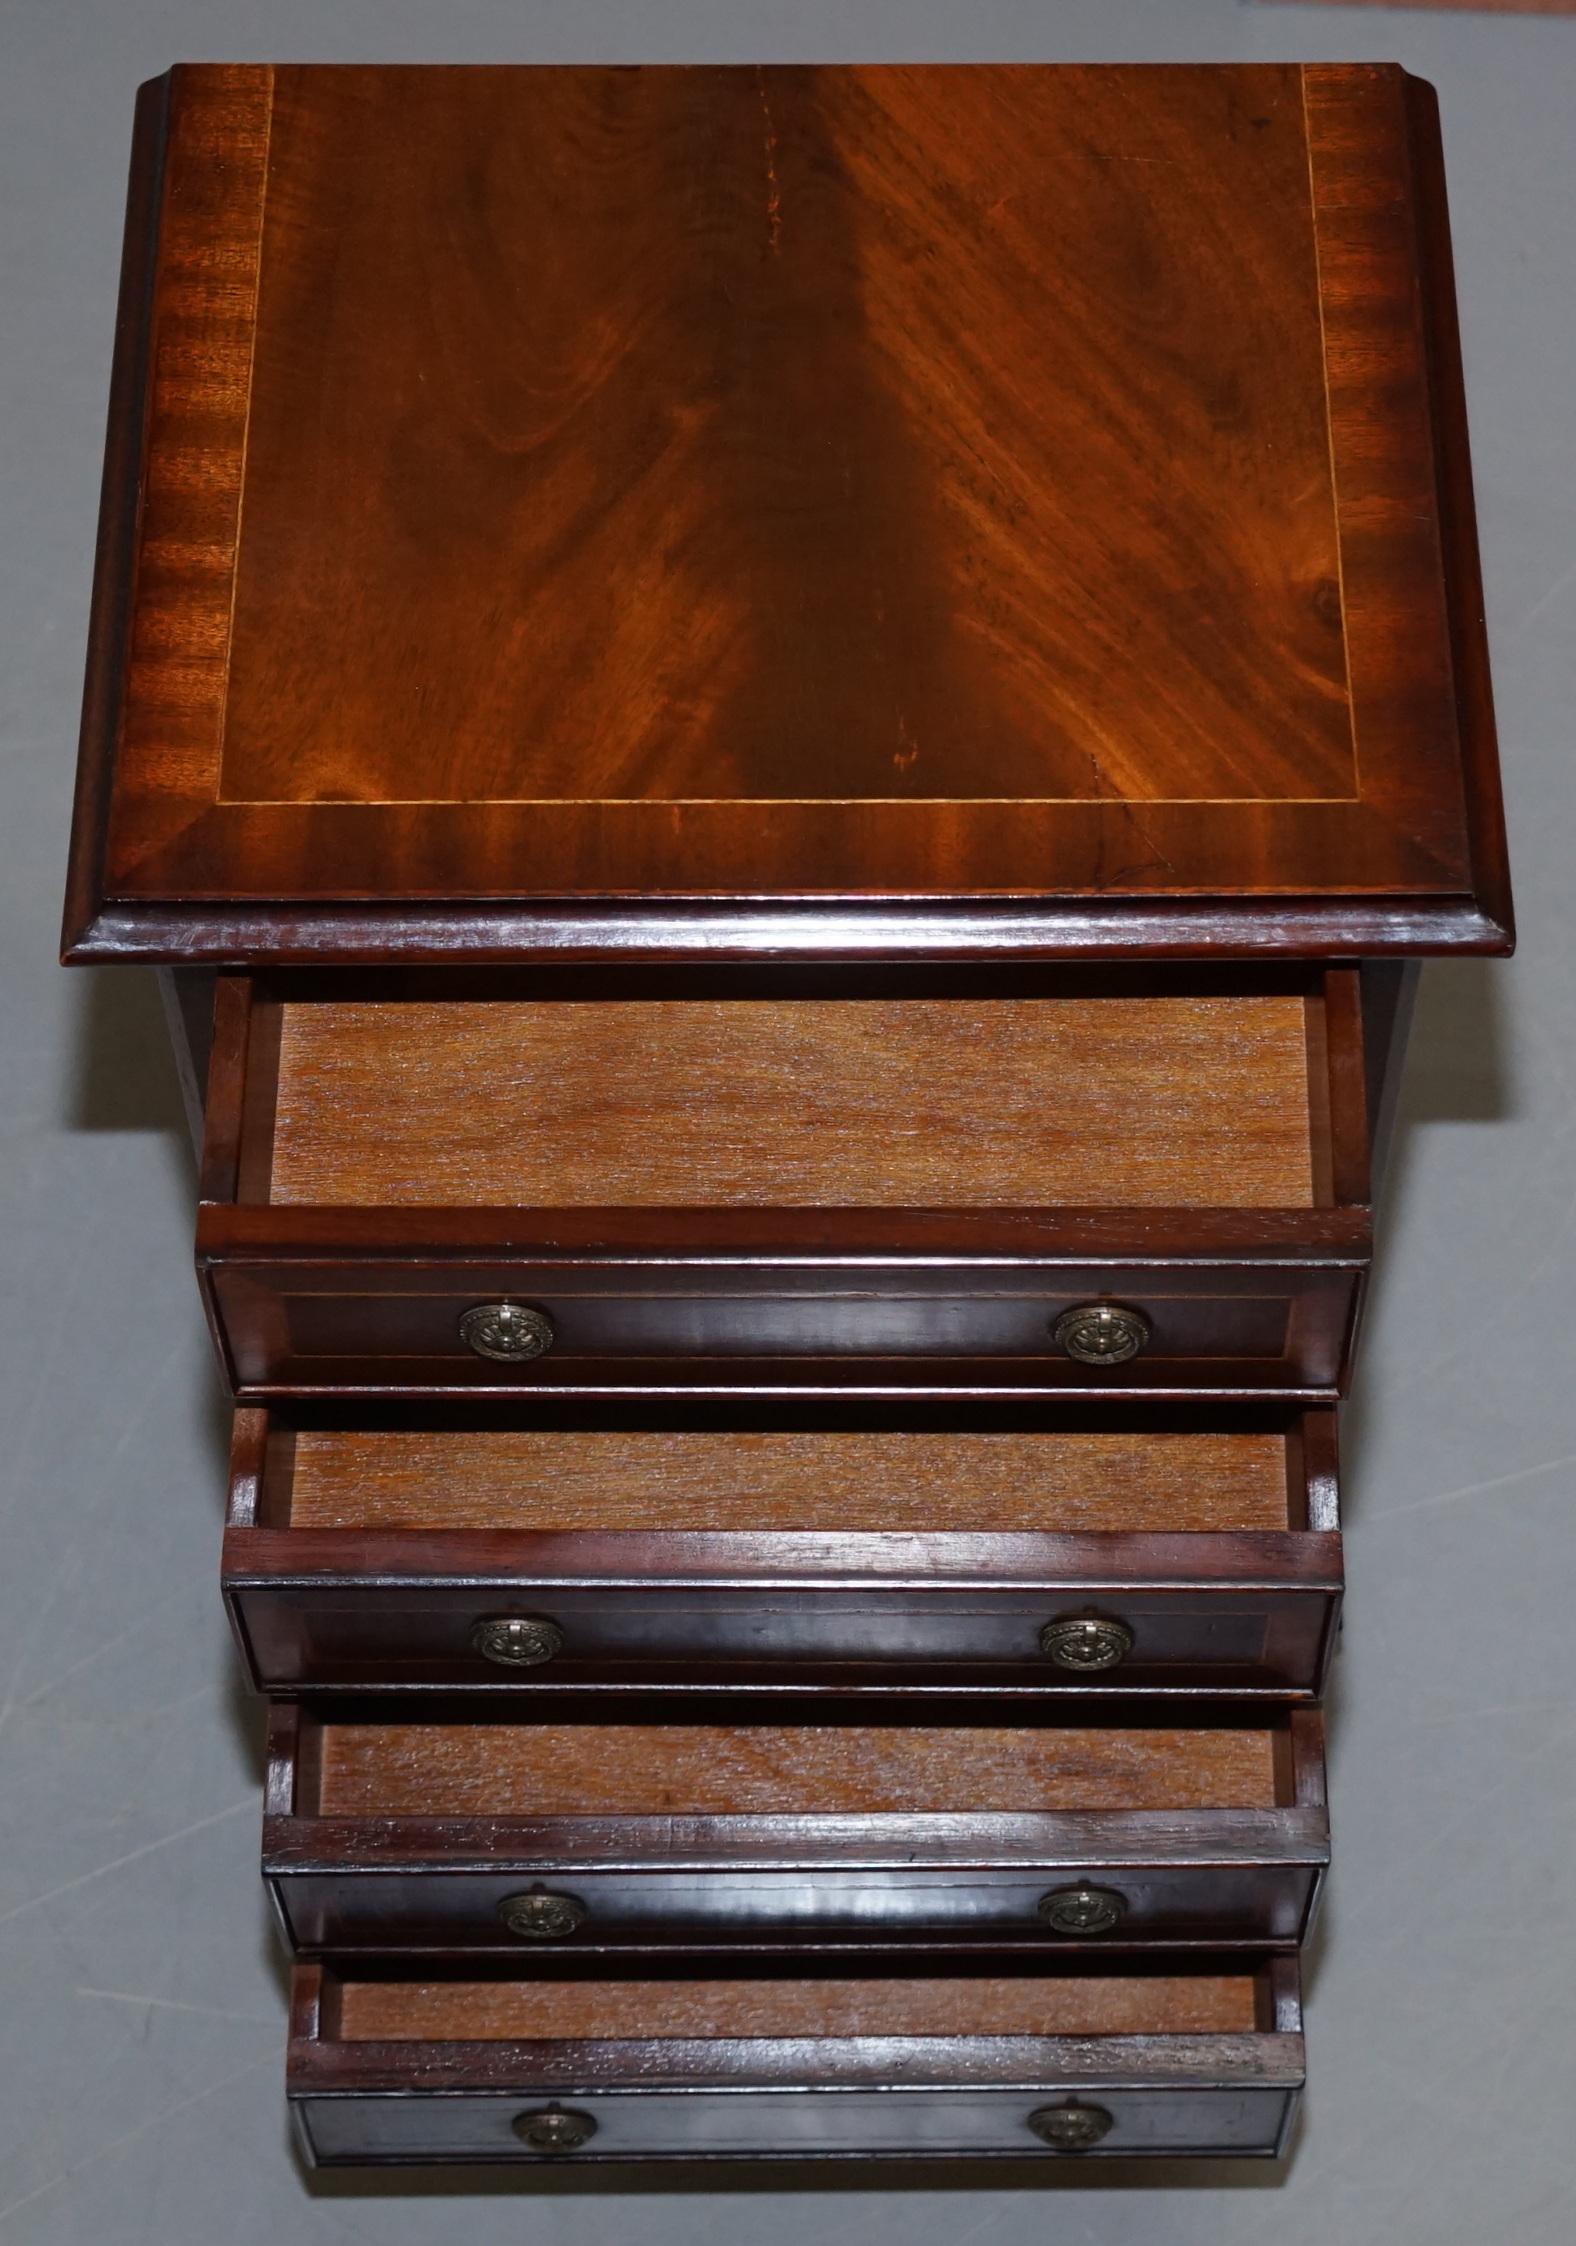 Pair of Flamed Mahogany Bedside Lamp Wine End Table Sized Chest of Drawers 14